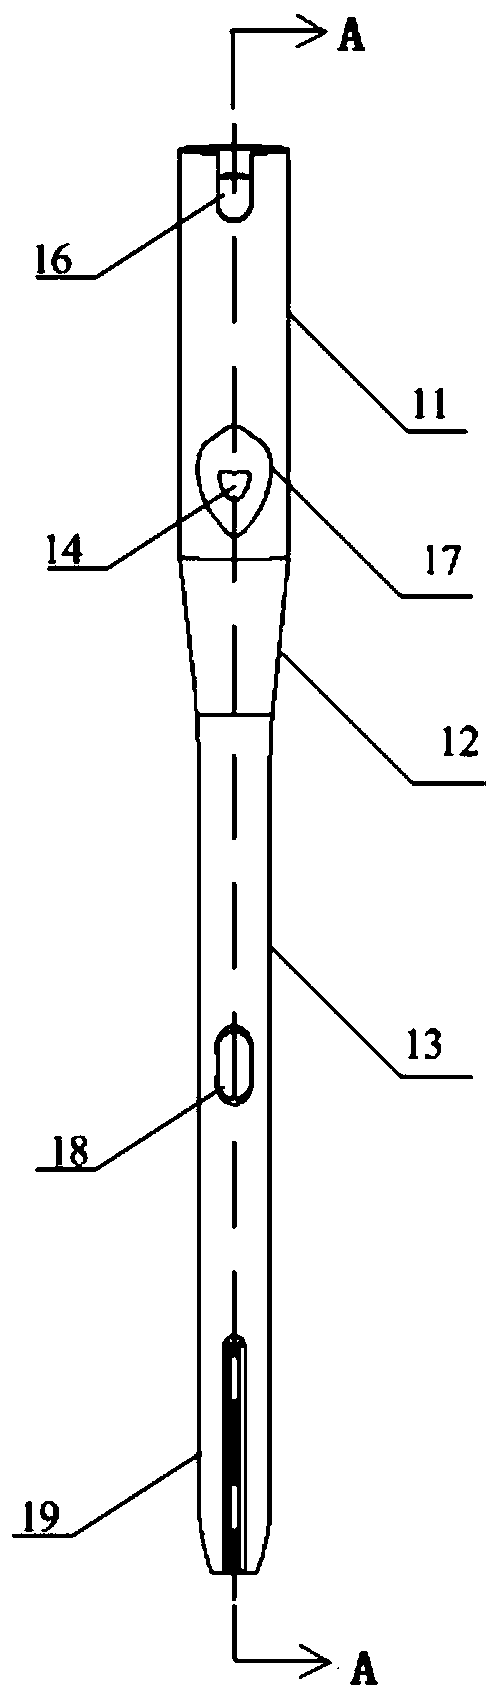 Assembled anatomical proximal femoral fracture intramedullary fixing device